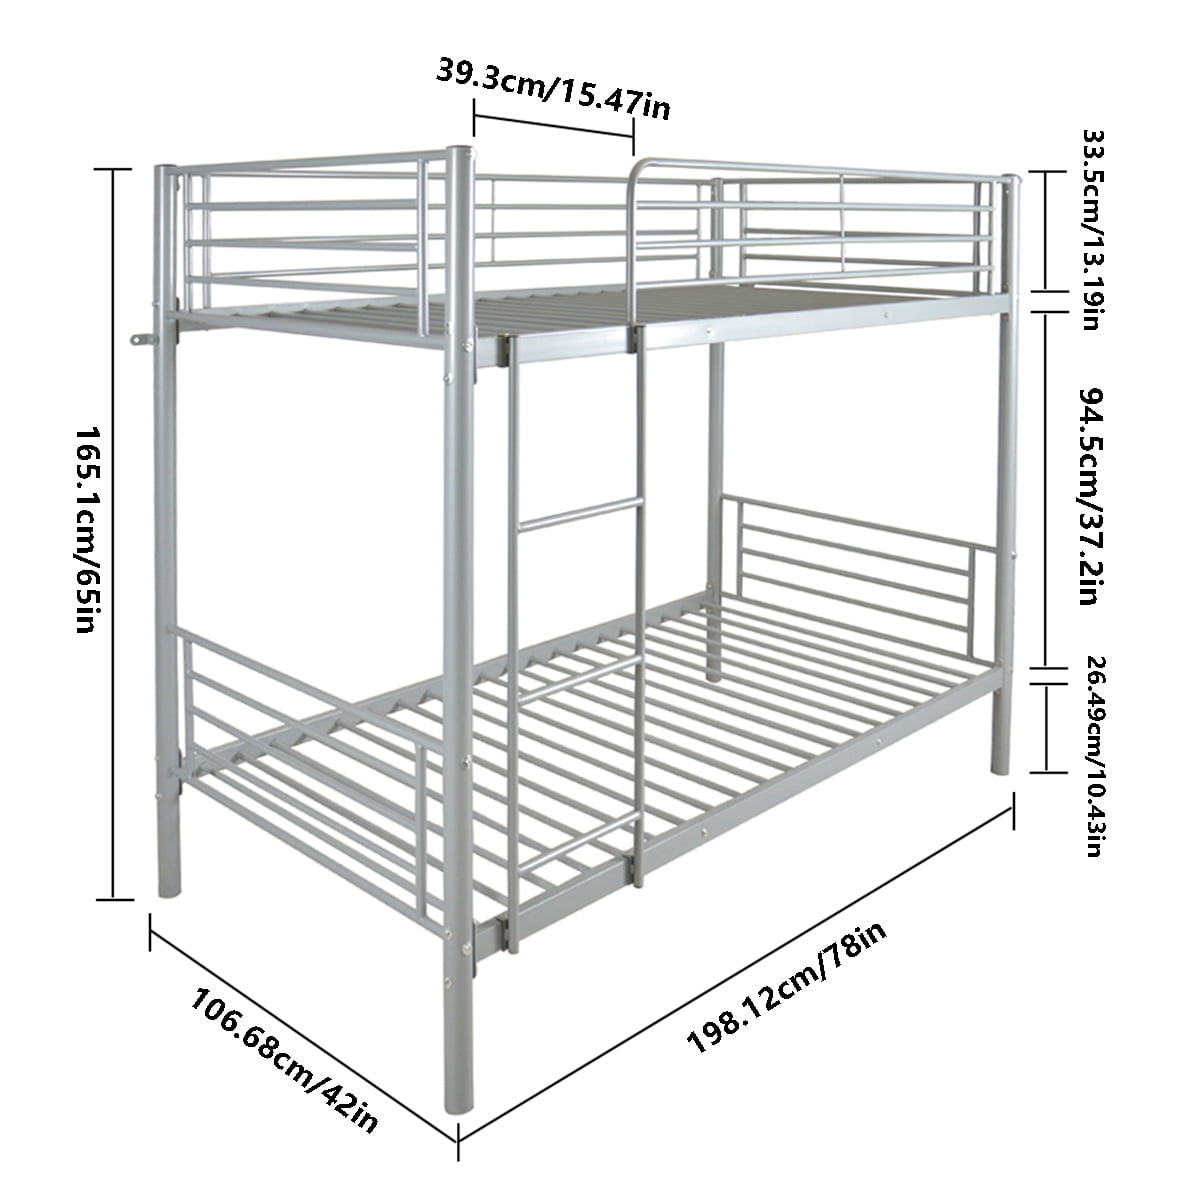 Iron Frame Bed Bunk Twin, Loft King Bed Frame With Headboard